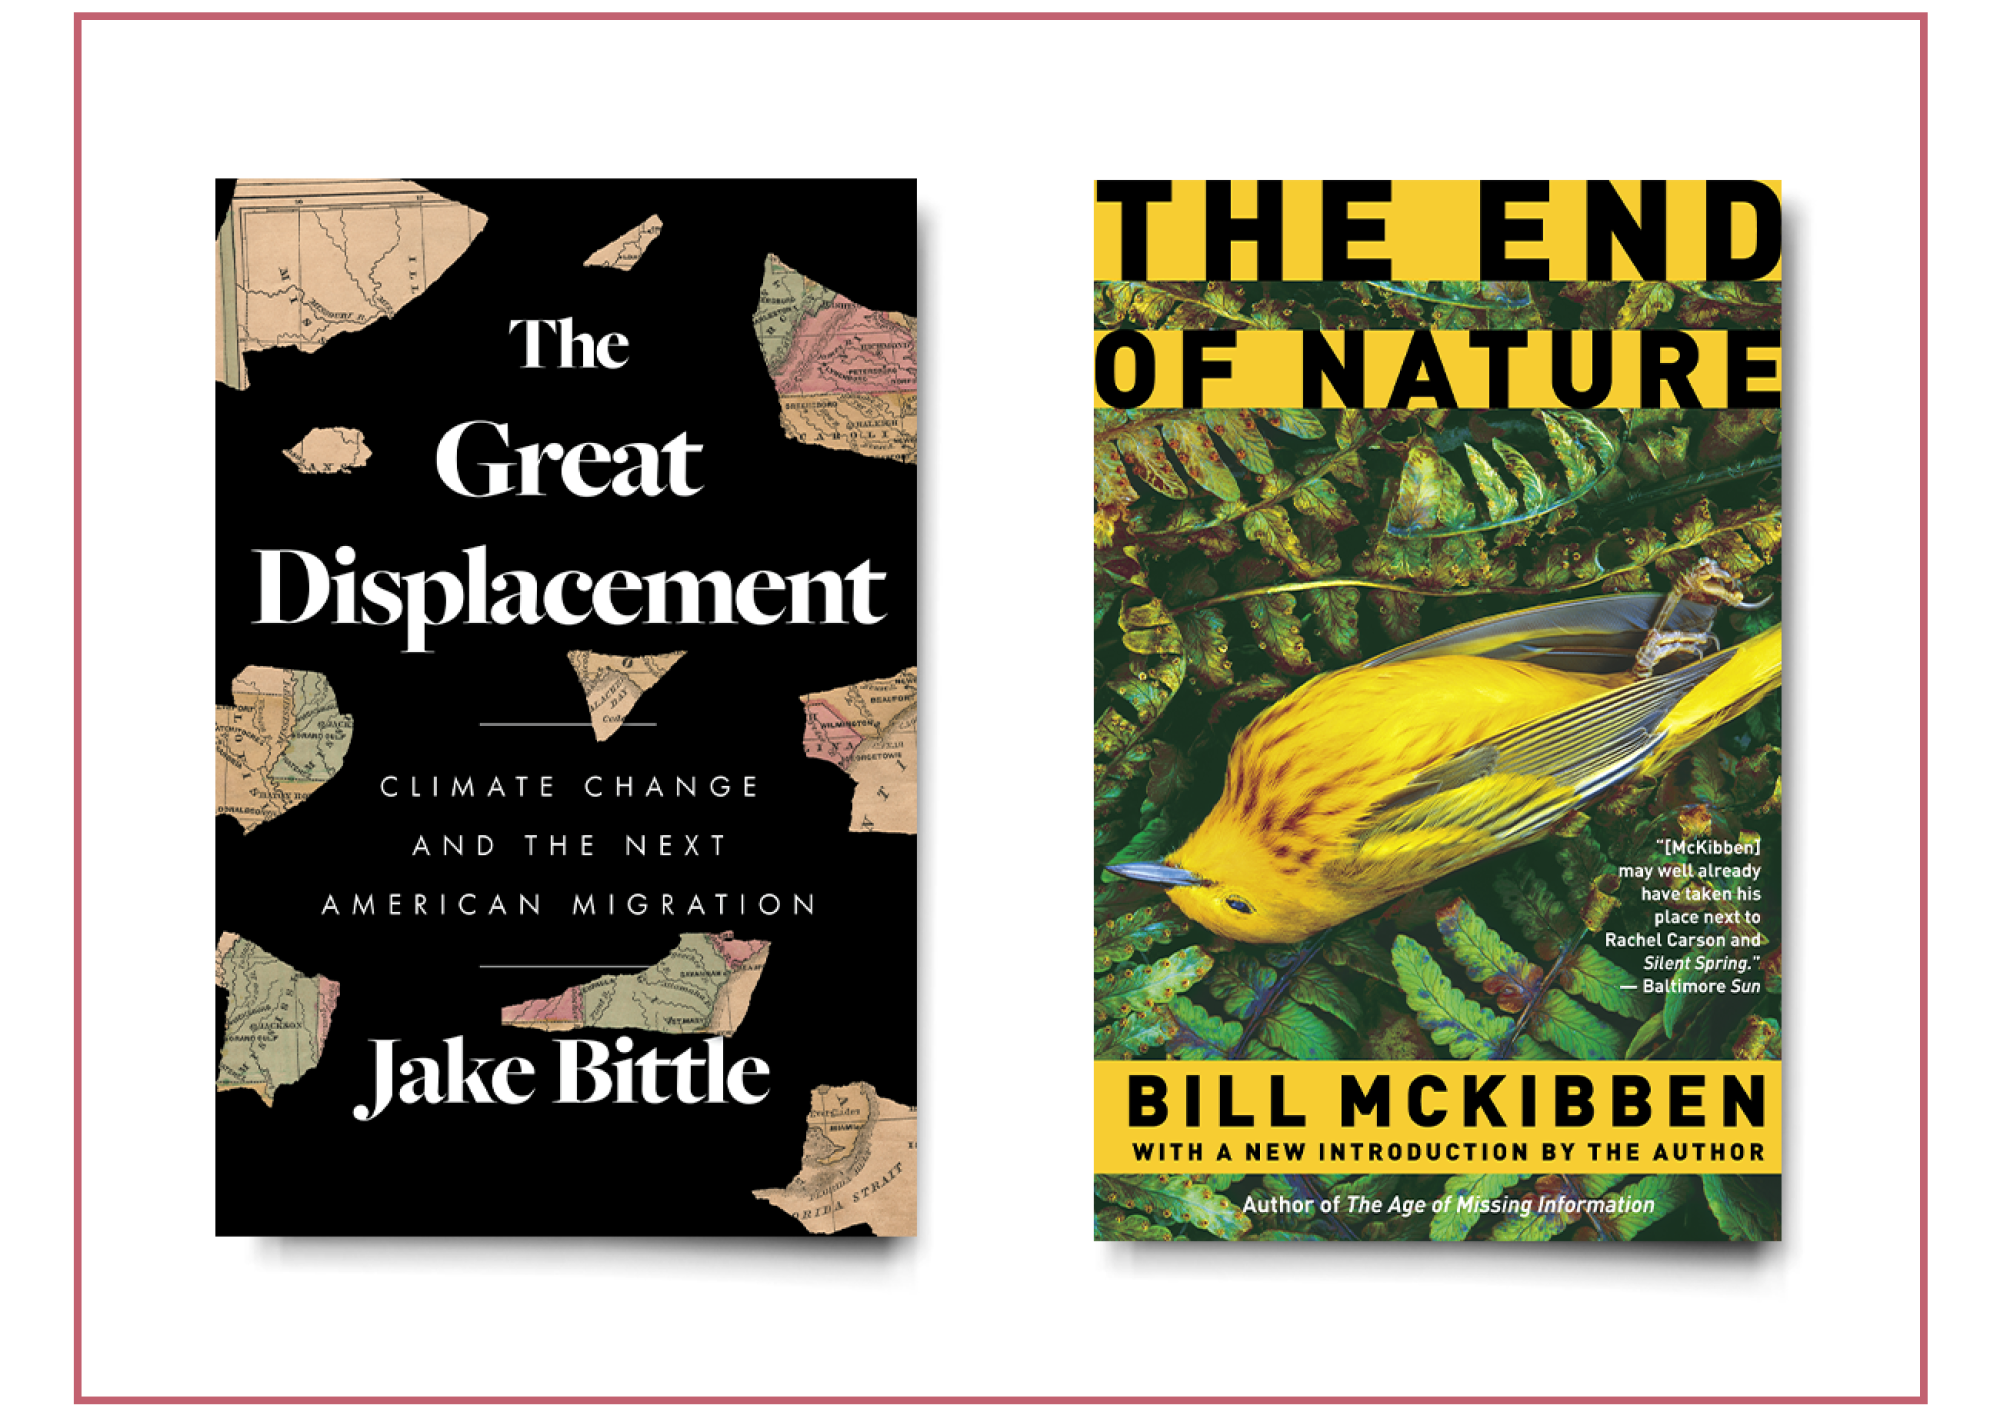 Book covers: "The Great Displacement" and "The End of Nature"